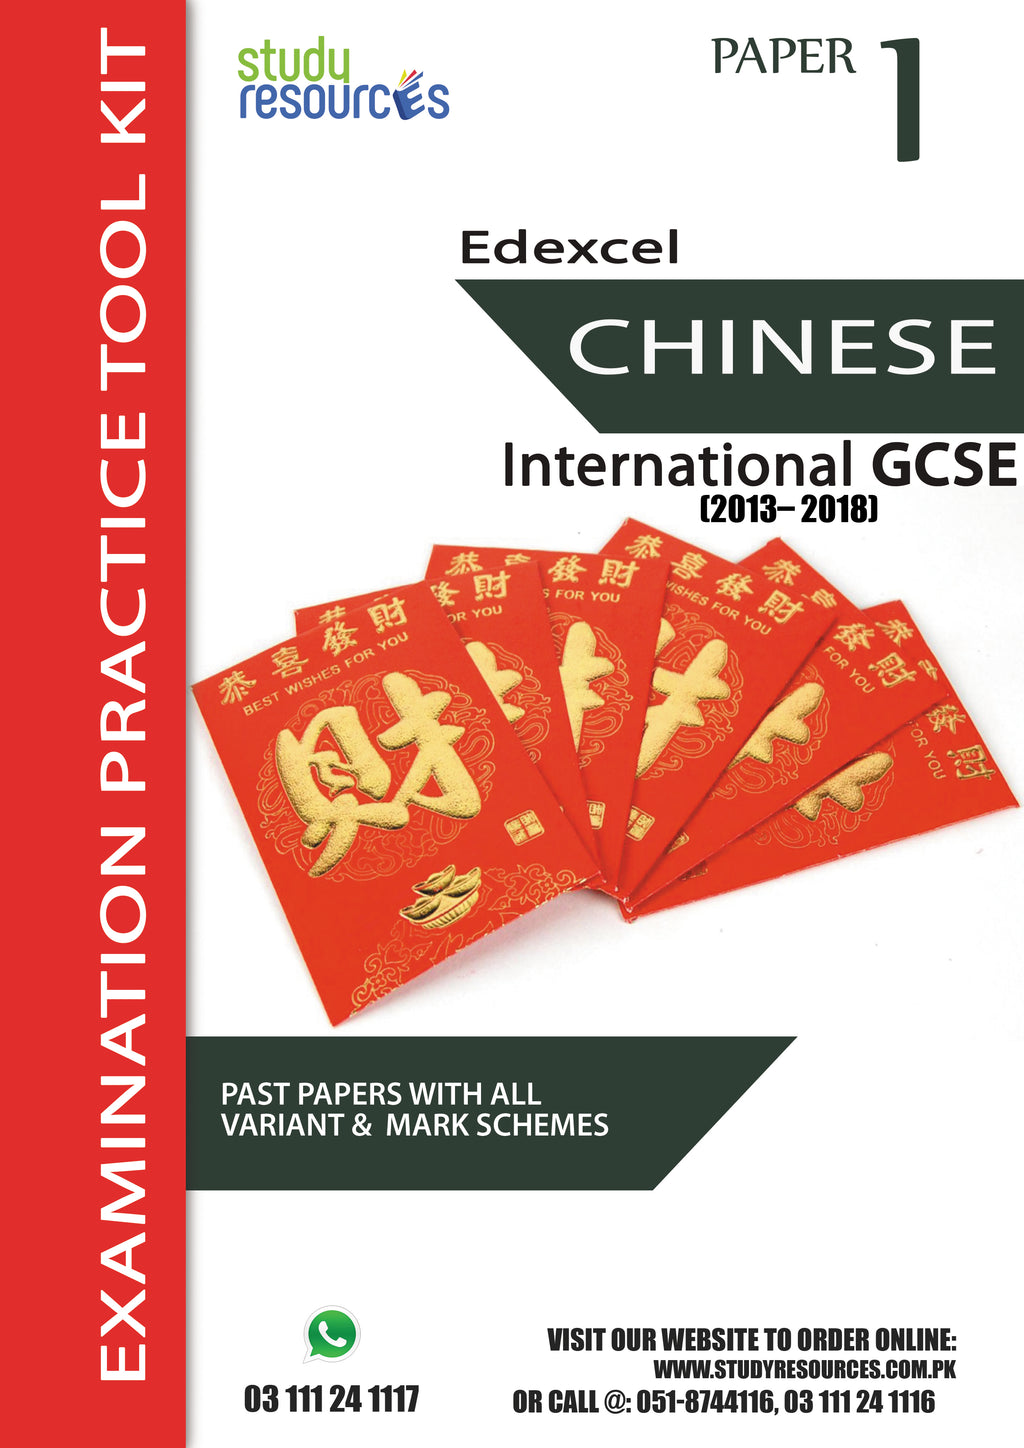 Edexcel IGCSE Chinese P-1 Past Papers (2013-2018)